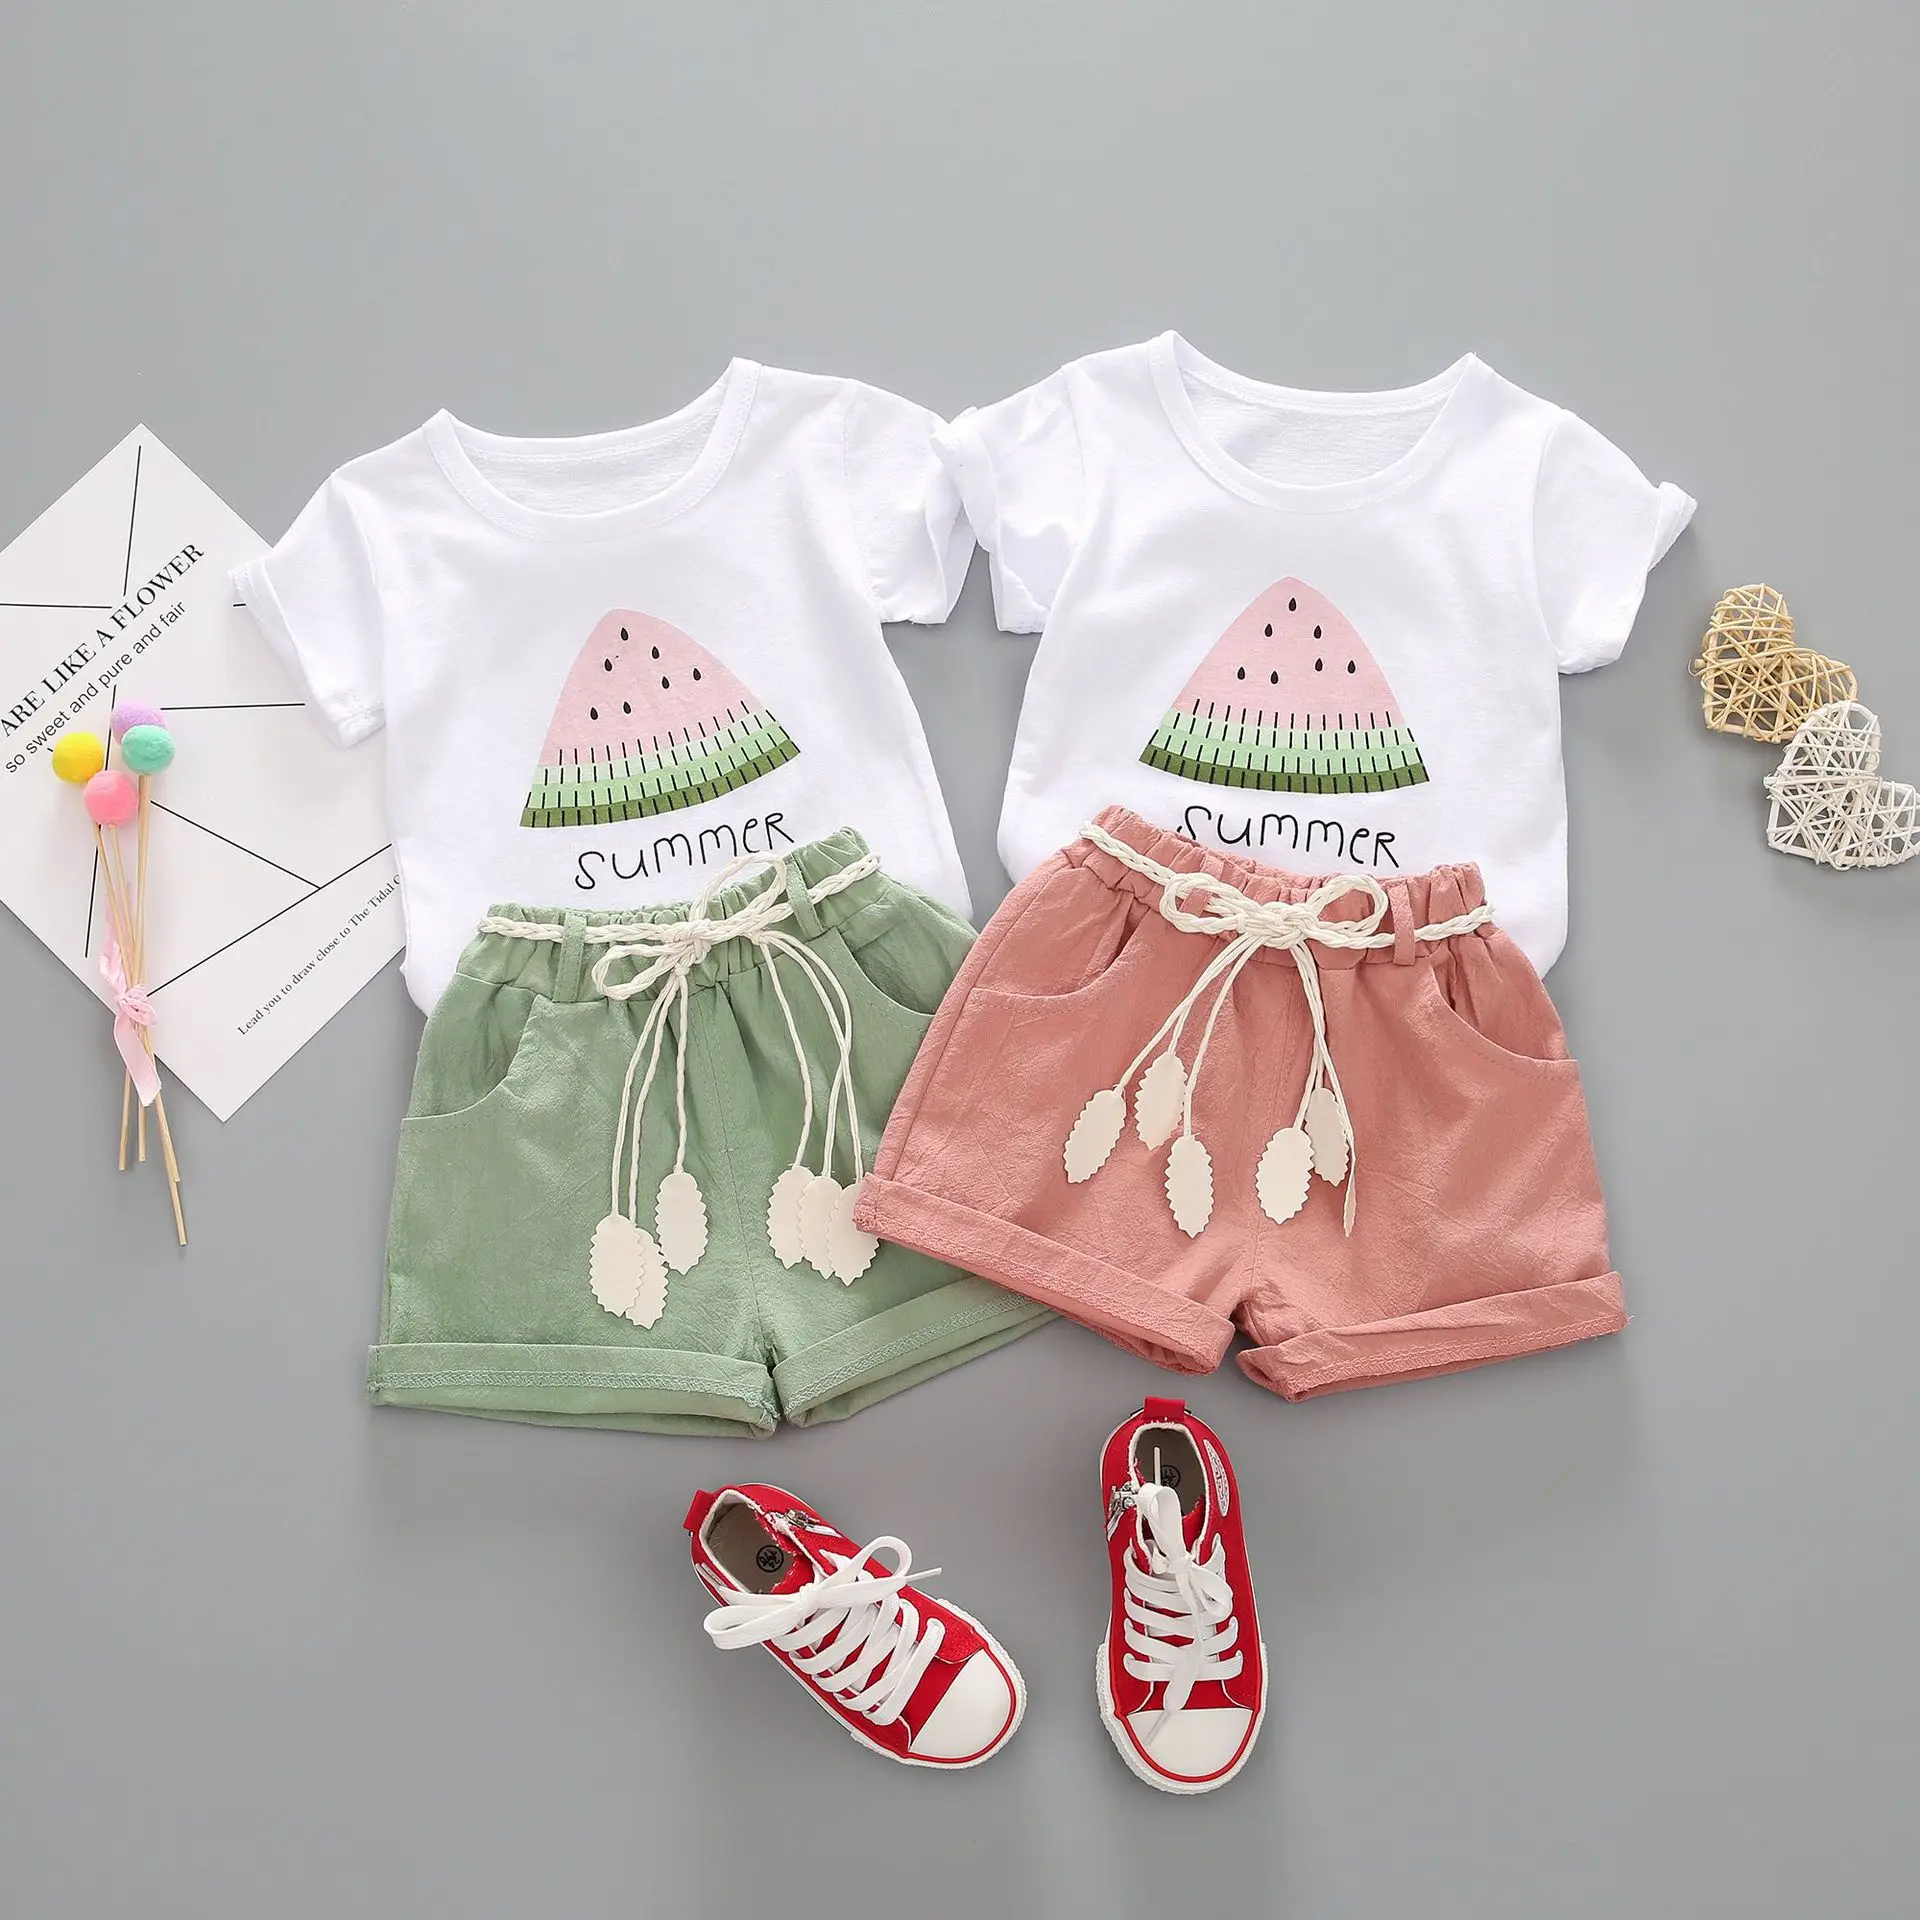 Children Girl S Summer Boutique Clothing Sets Cute Cartoon Watermelon Print Kids Girls Clothes Buy Girls Summer Sets Girl S Sets Girls Boutique Sets Product On Alibaba Com